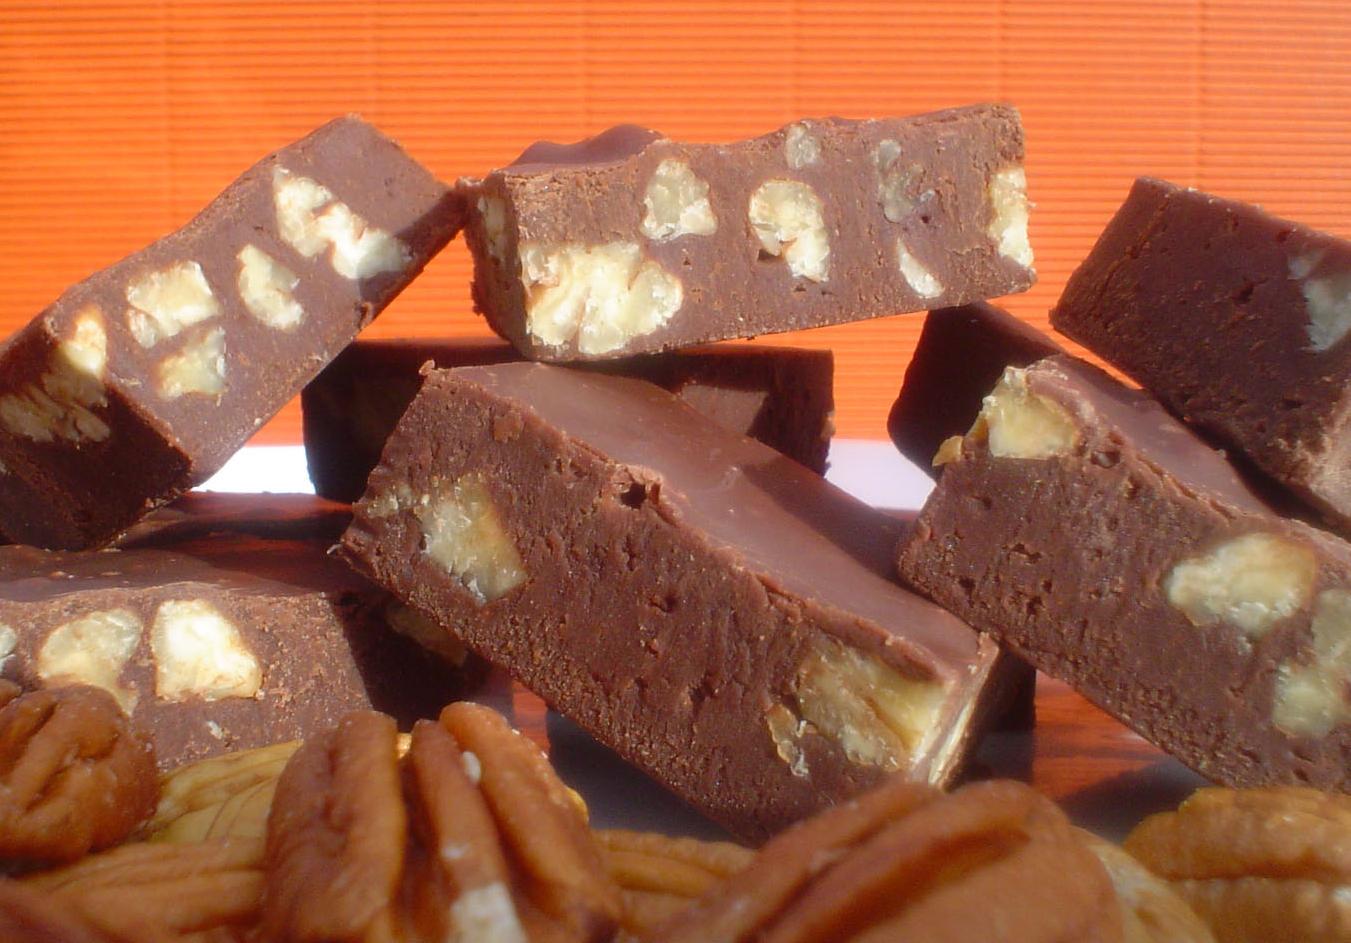  Satisfy your sweet tooth with this coffee-infused fudge!